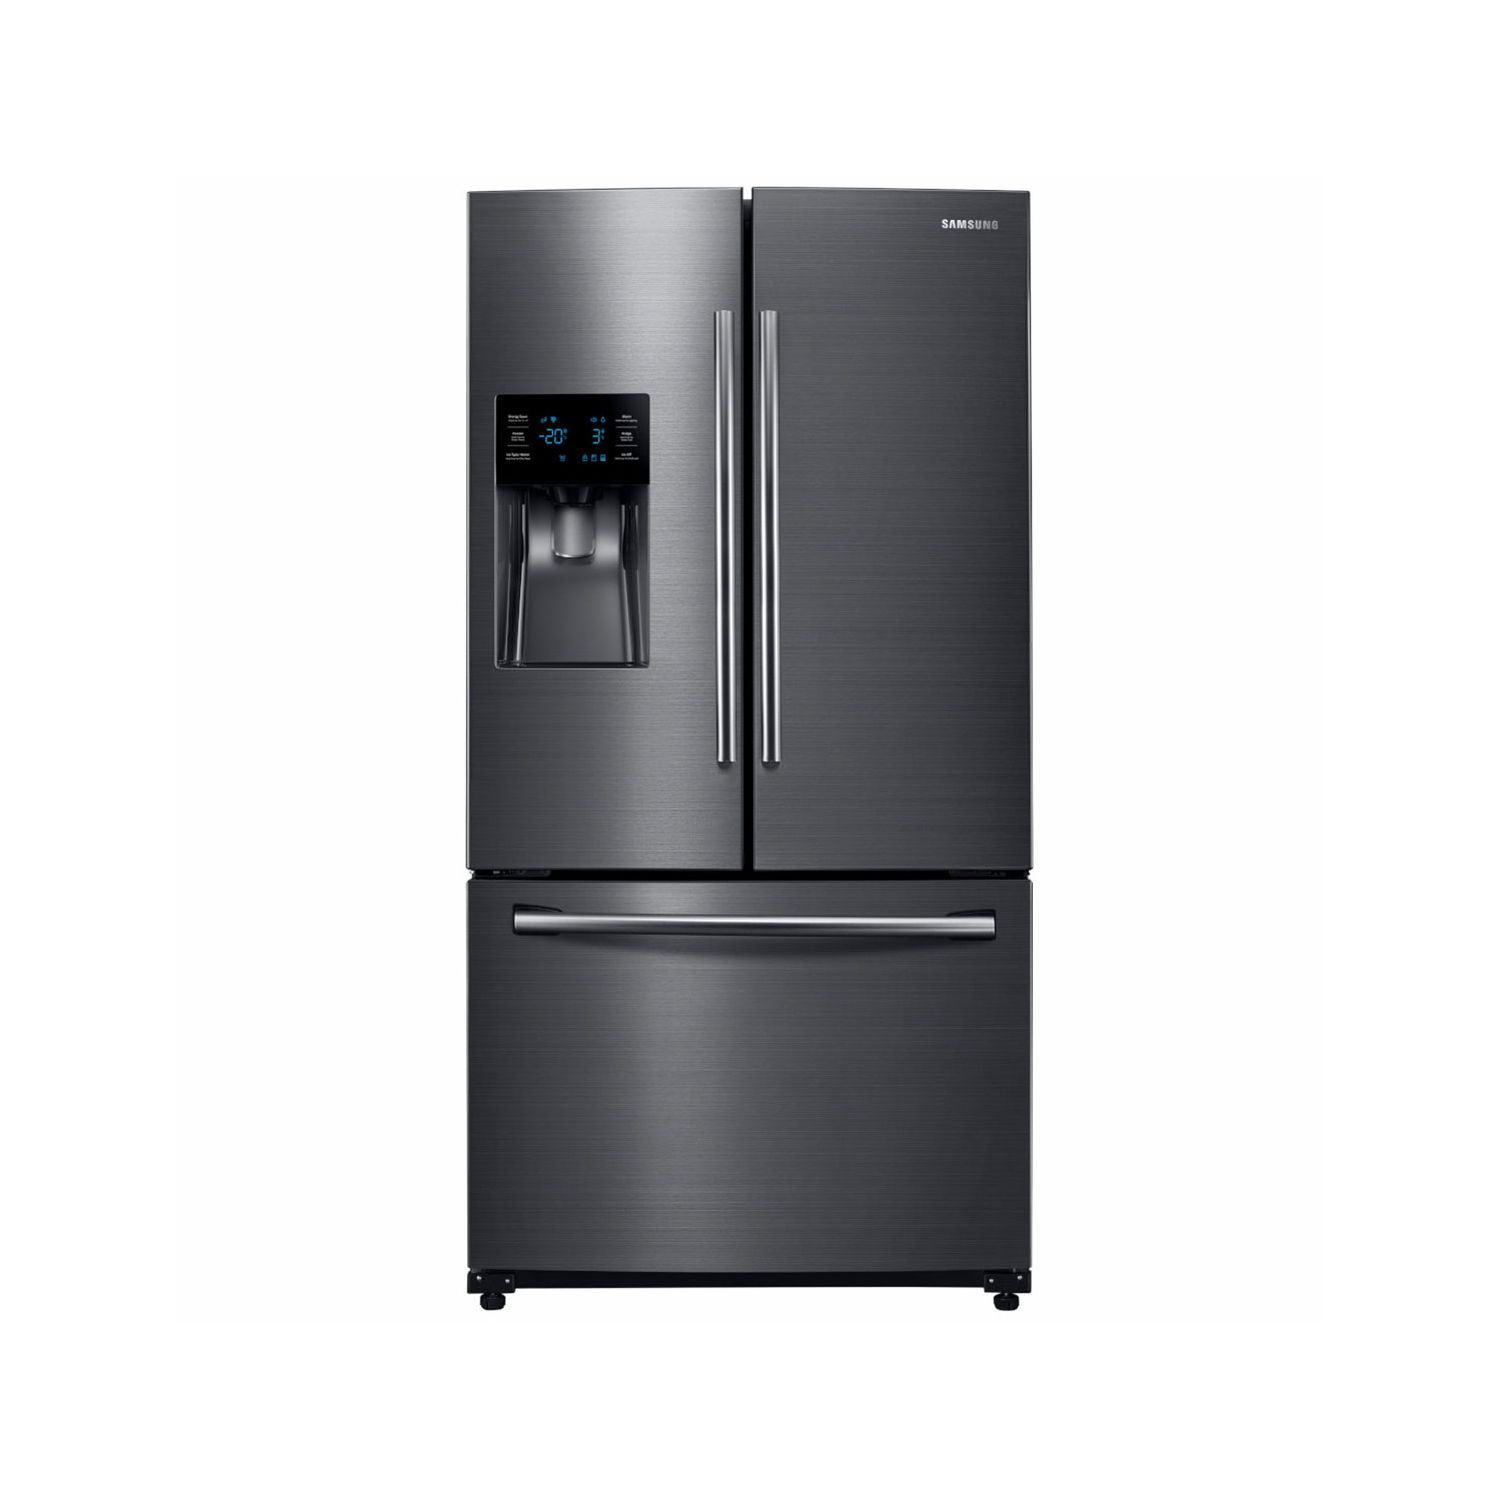 SAMSUNG RF263BEAESG 25.6 Cu. Ft. 3-Door French Door Refrigerator with External Water and Ice Dispenser in Black Stainless Steel